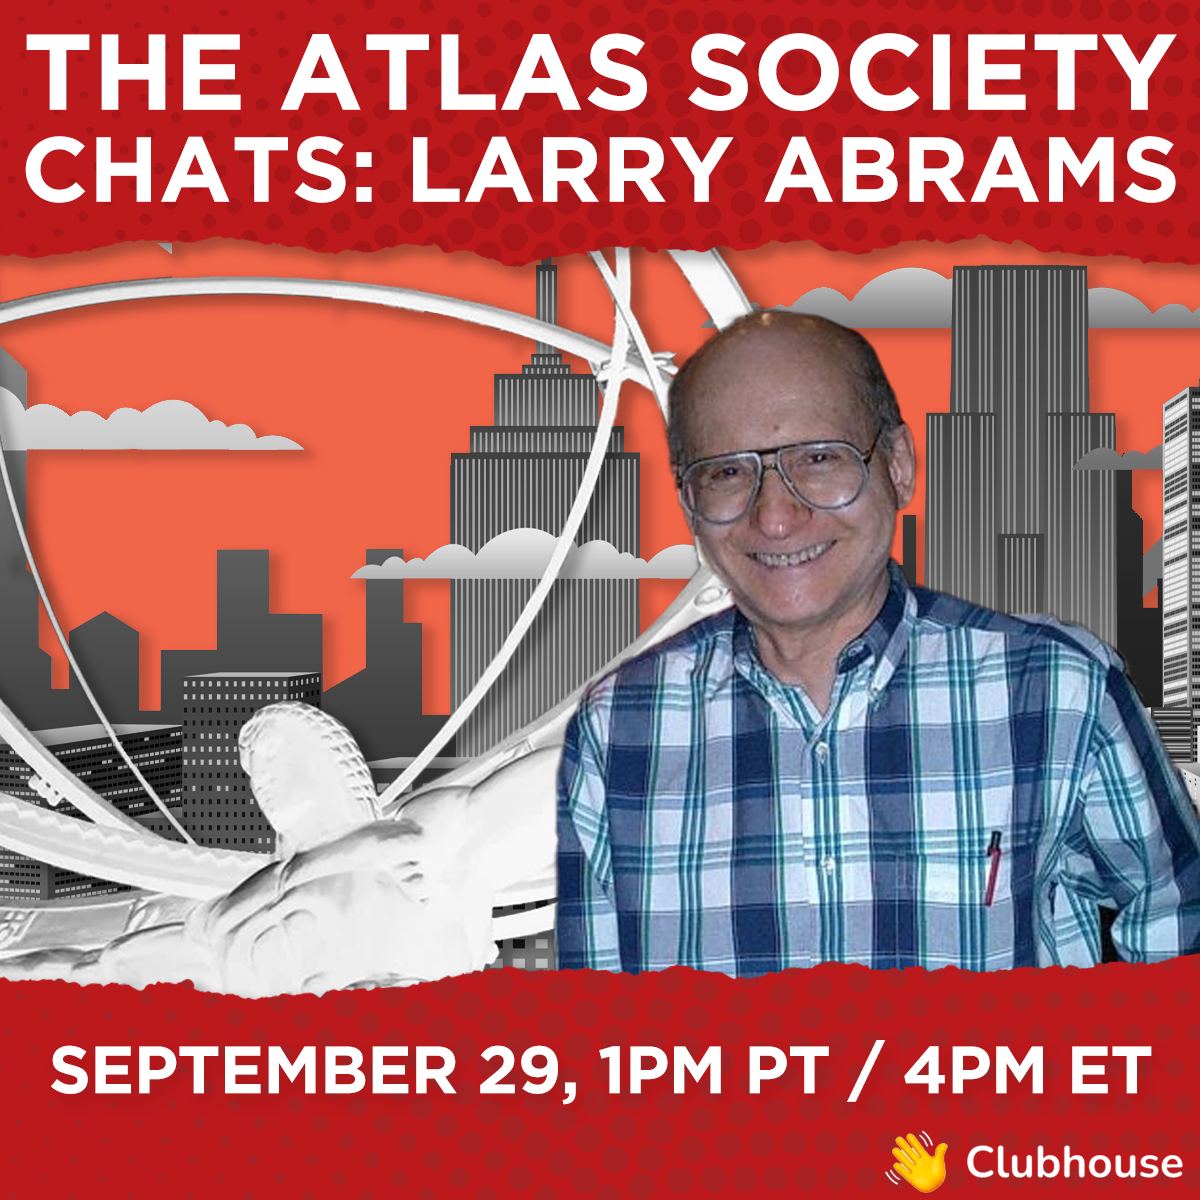 The Atlas Society Chats with Larry Abrams